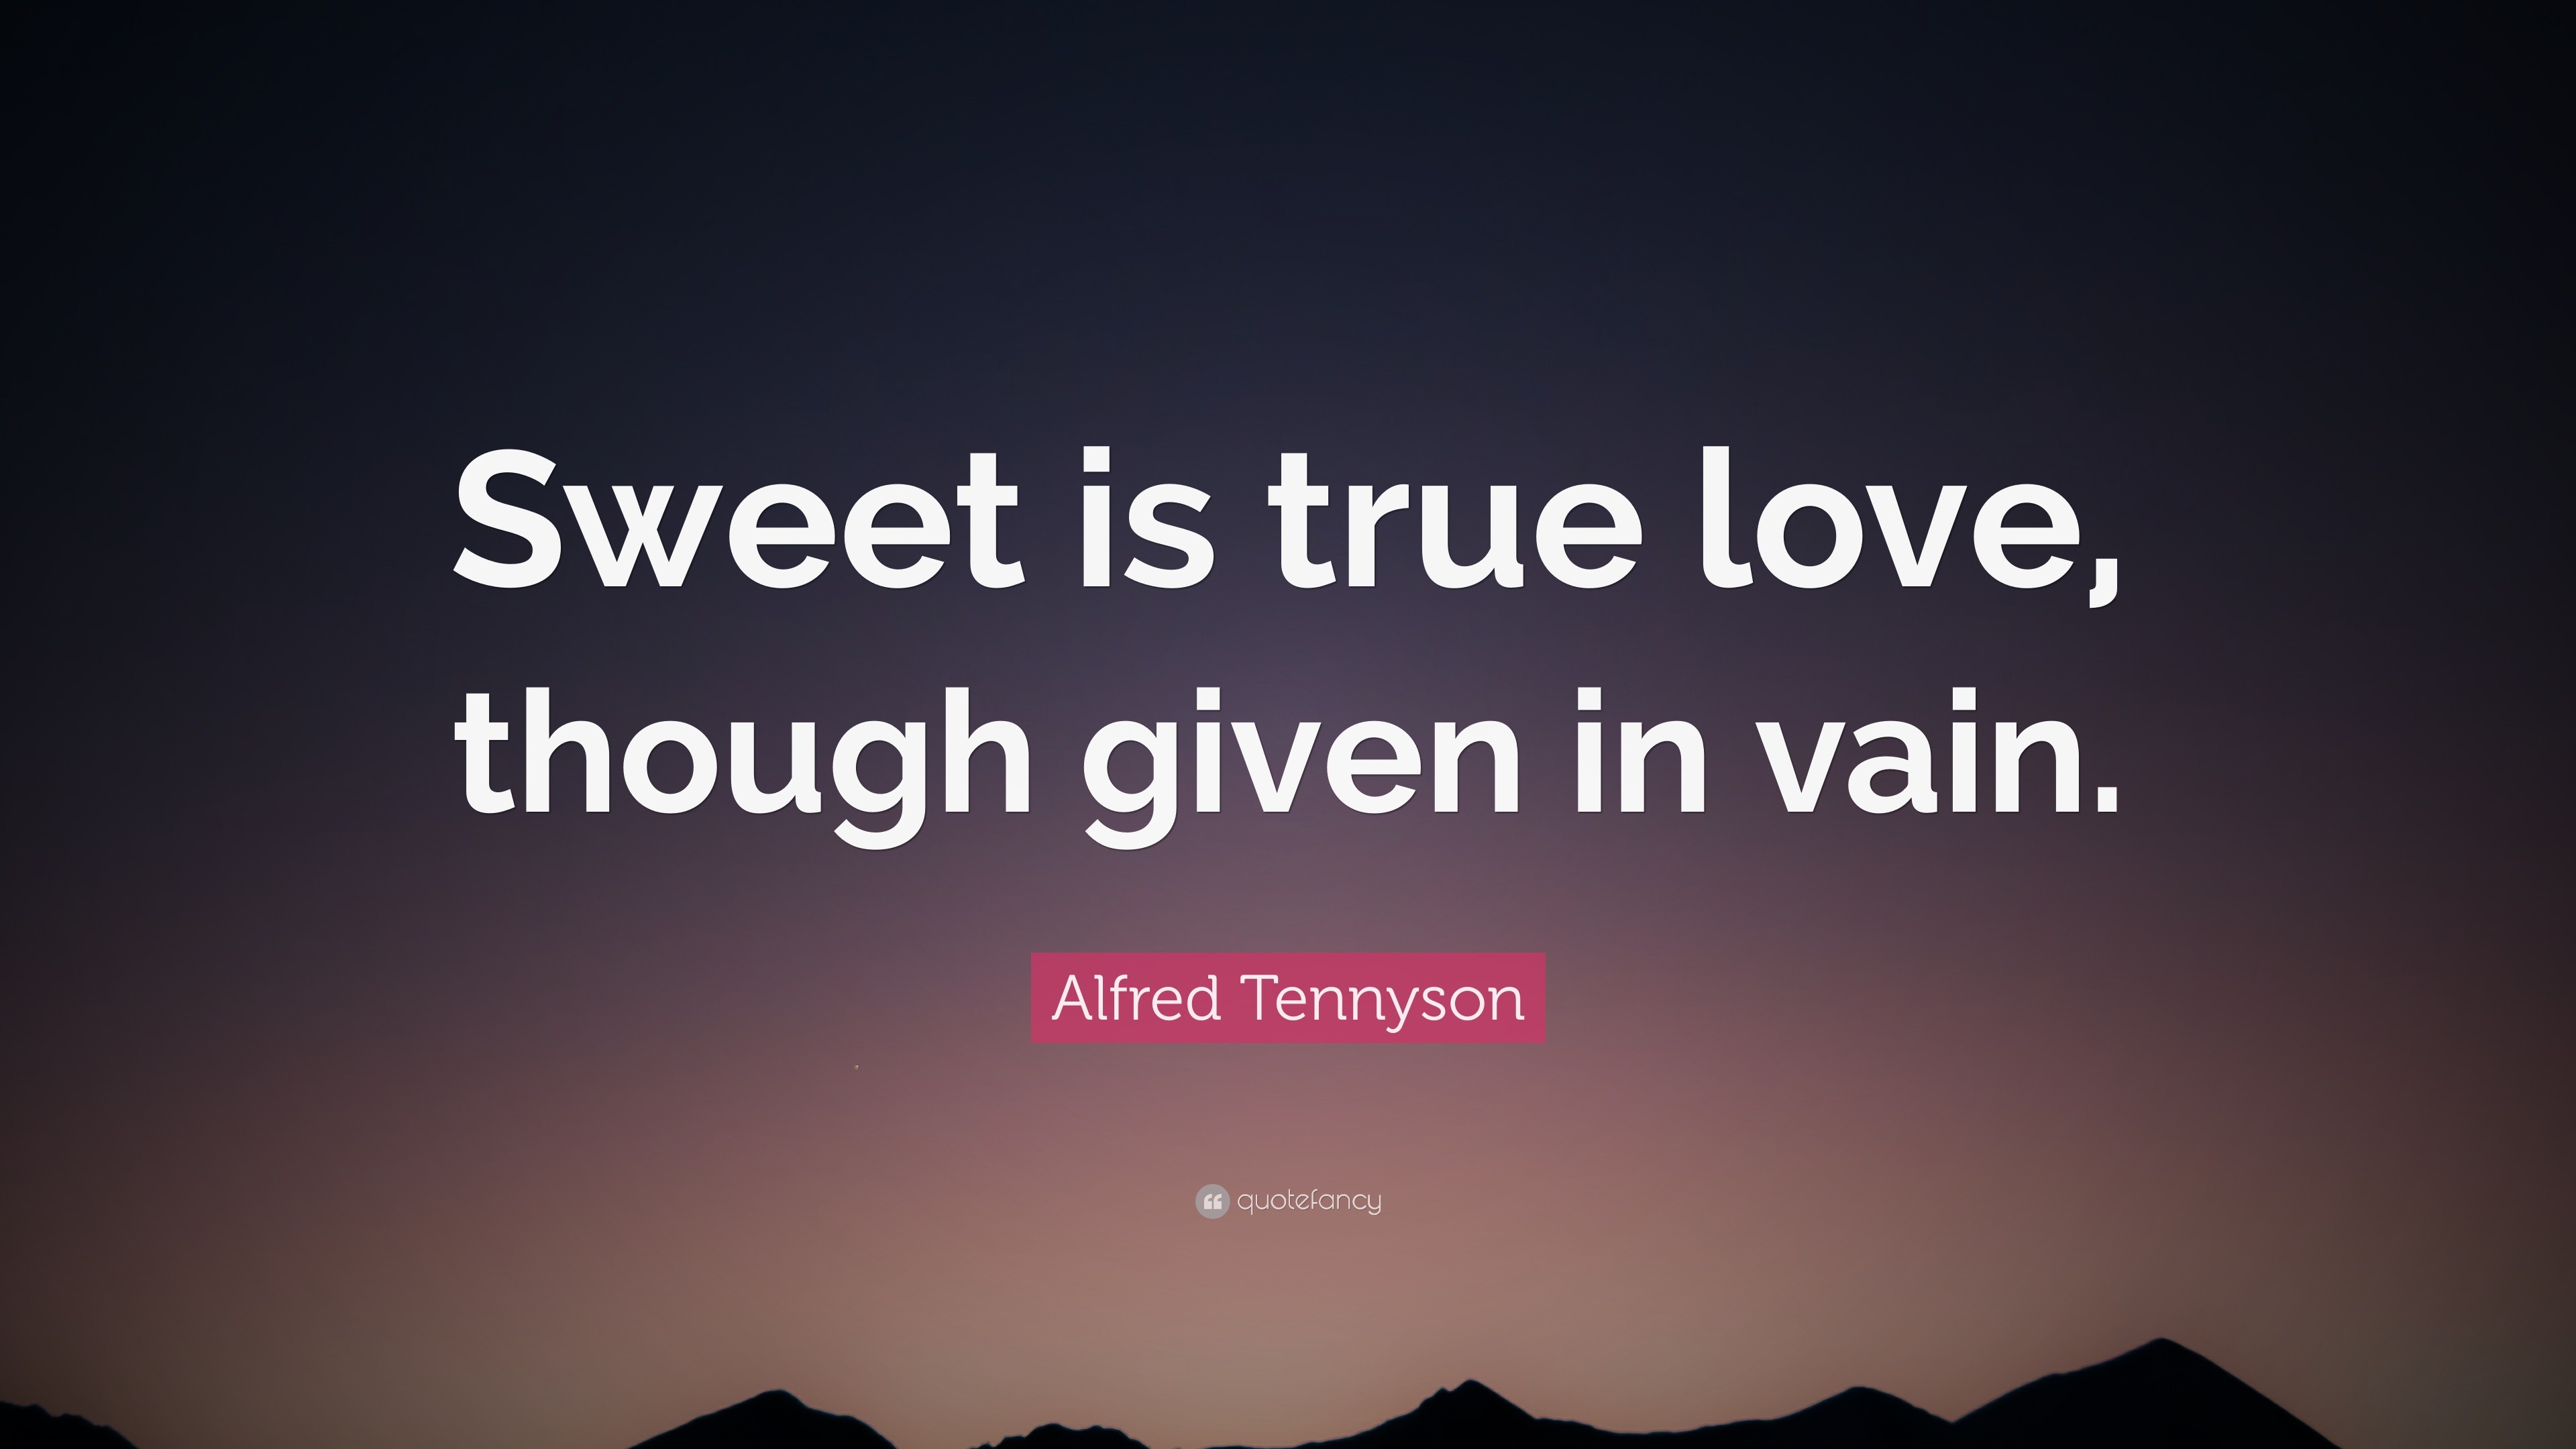 Alfred Tennyson Quote “Sweet is true love though given in vain ”